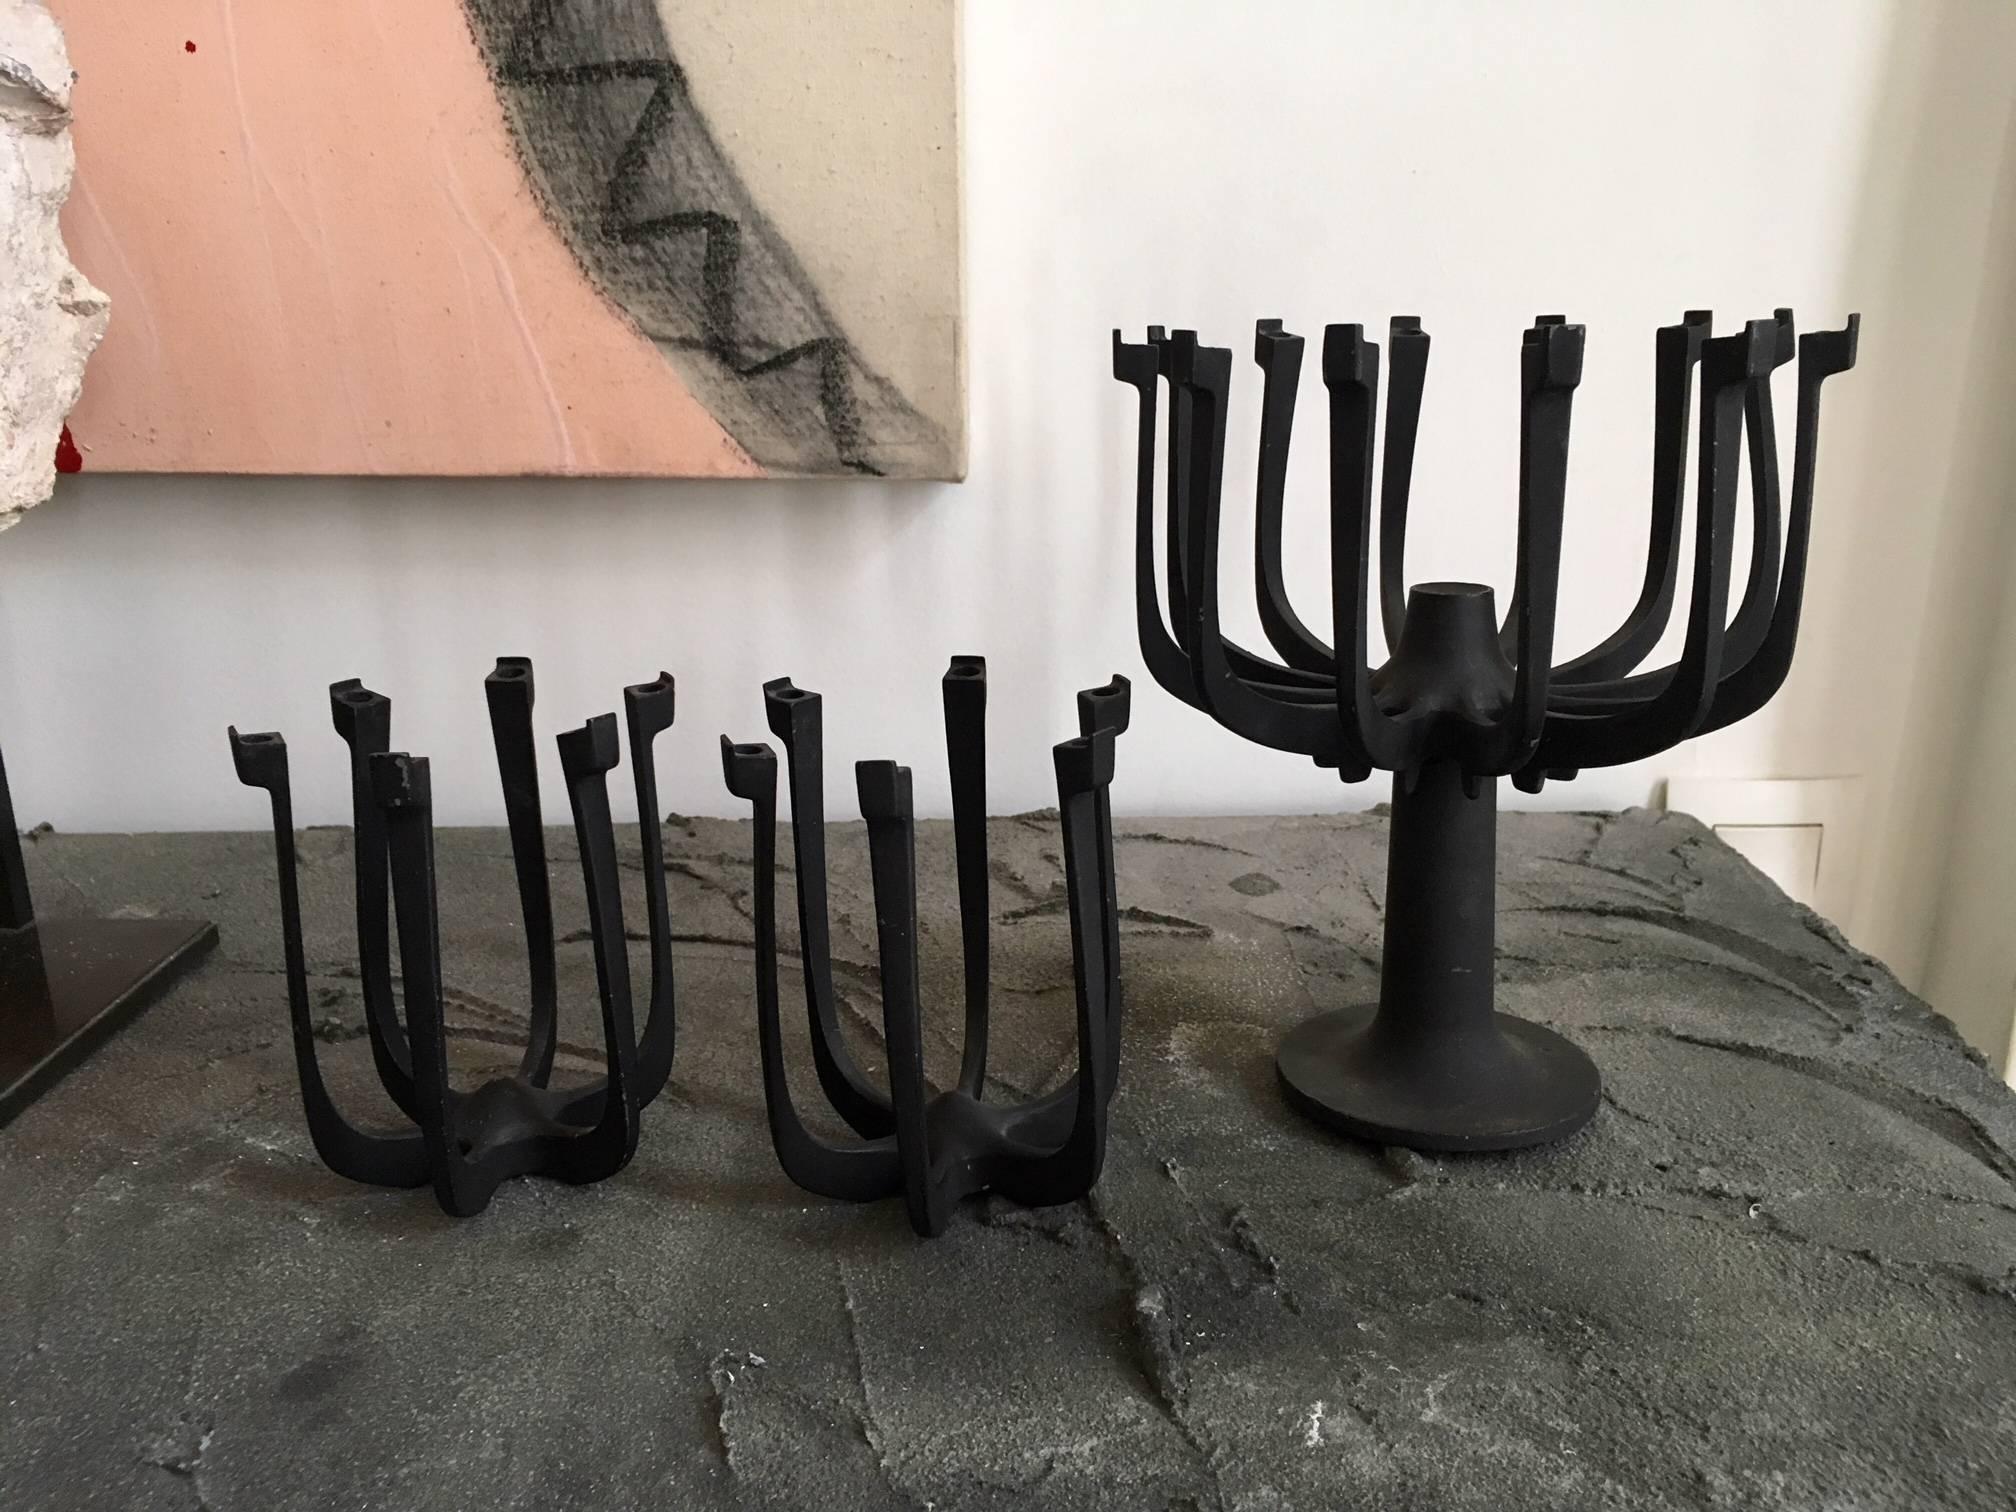 Rare midcentury cast zinc candle holder set design by Gunnar Cyren for Dansk.
Likely the most iconic example of Gunnar Cyren’s designs from his tenure at Dansk Designs, this Vintage Original, 12-arm, AGLOW Candelabra with pedestal base .The patina